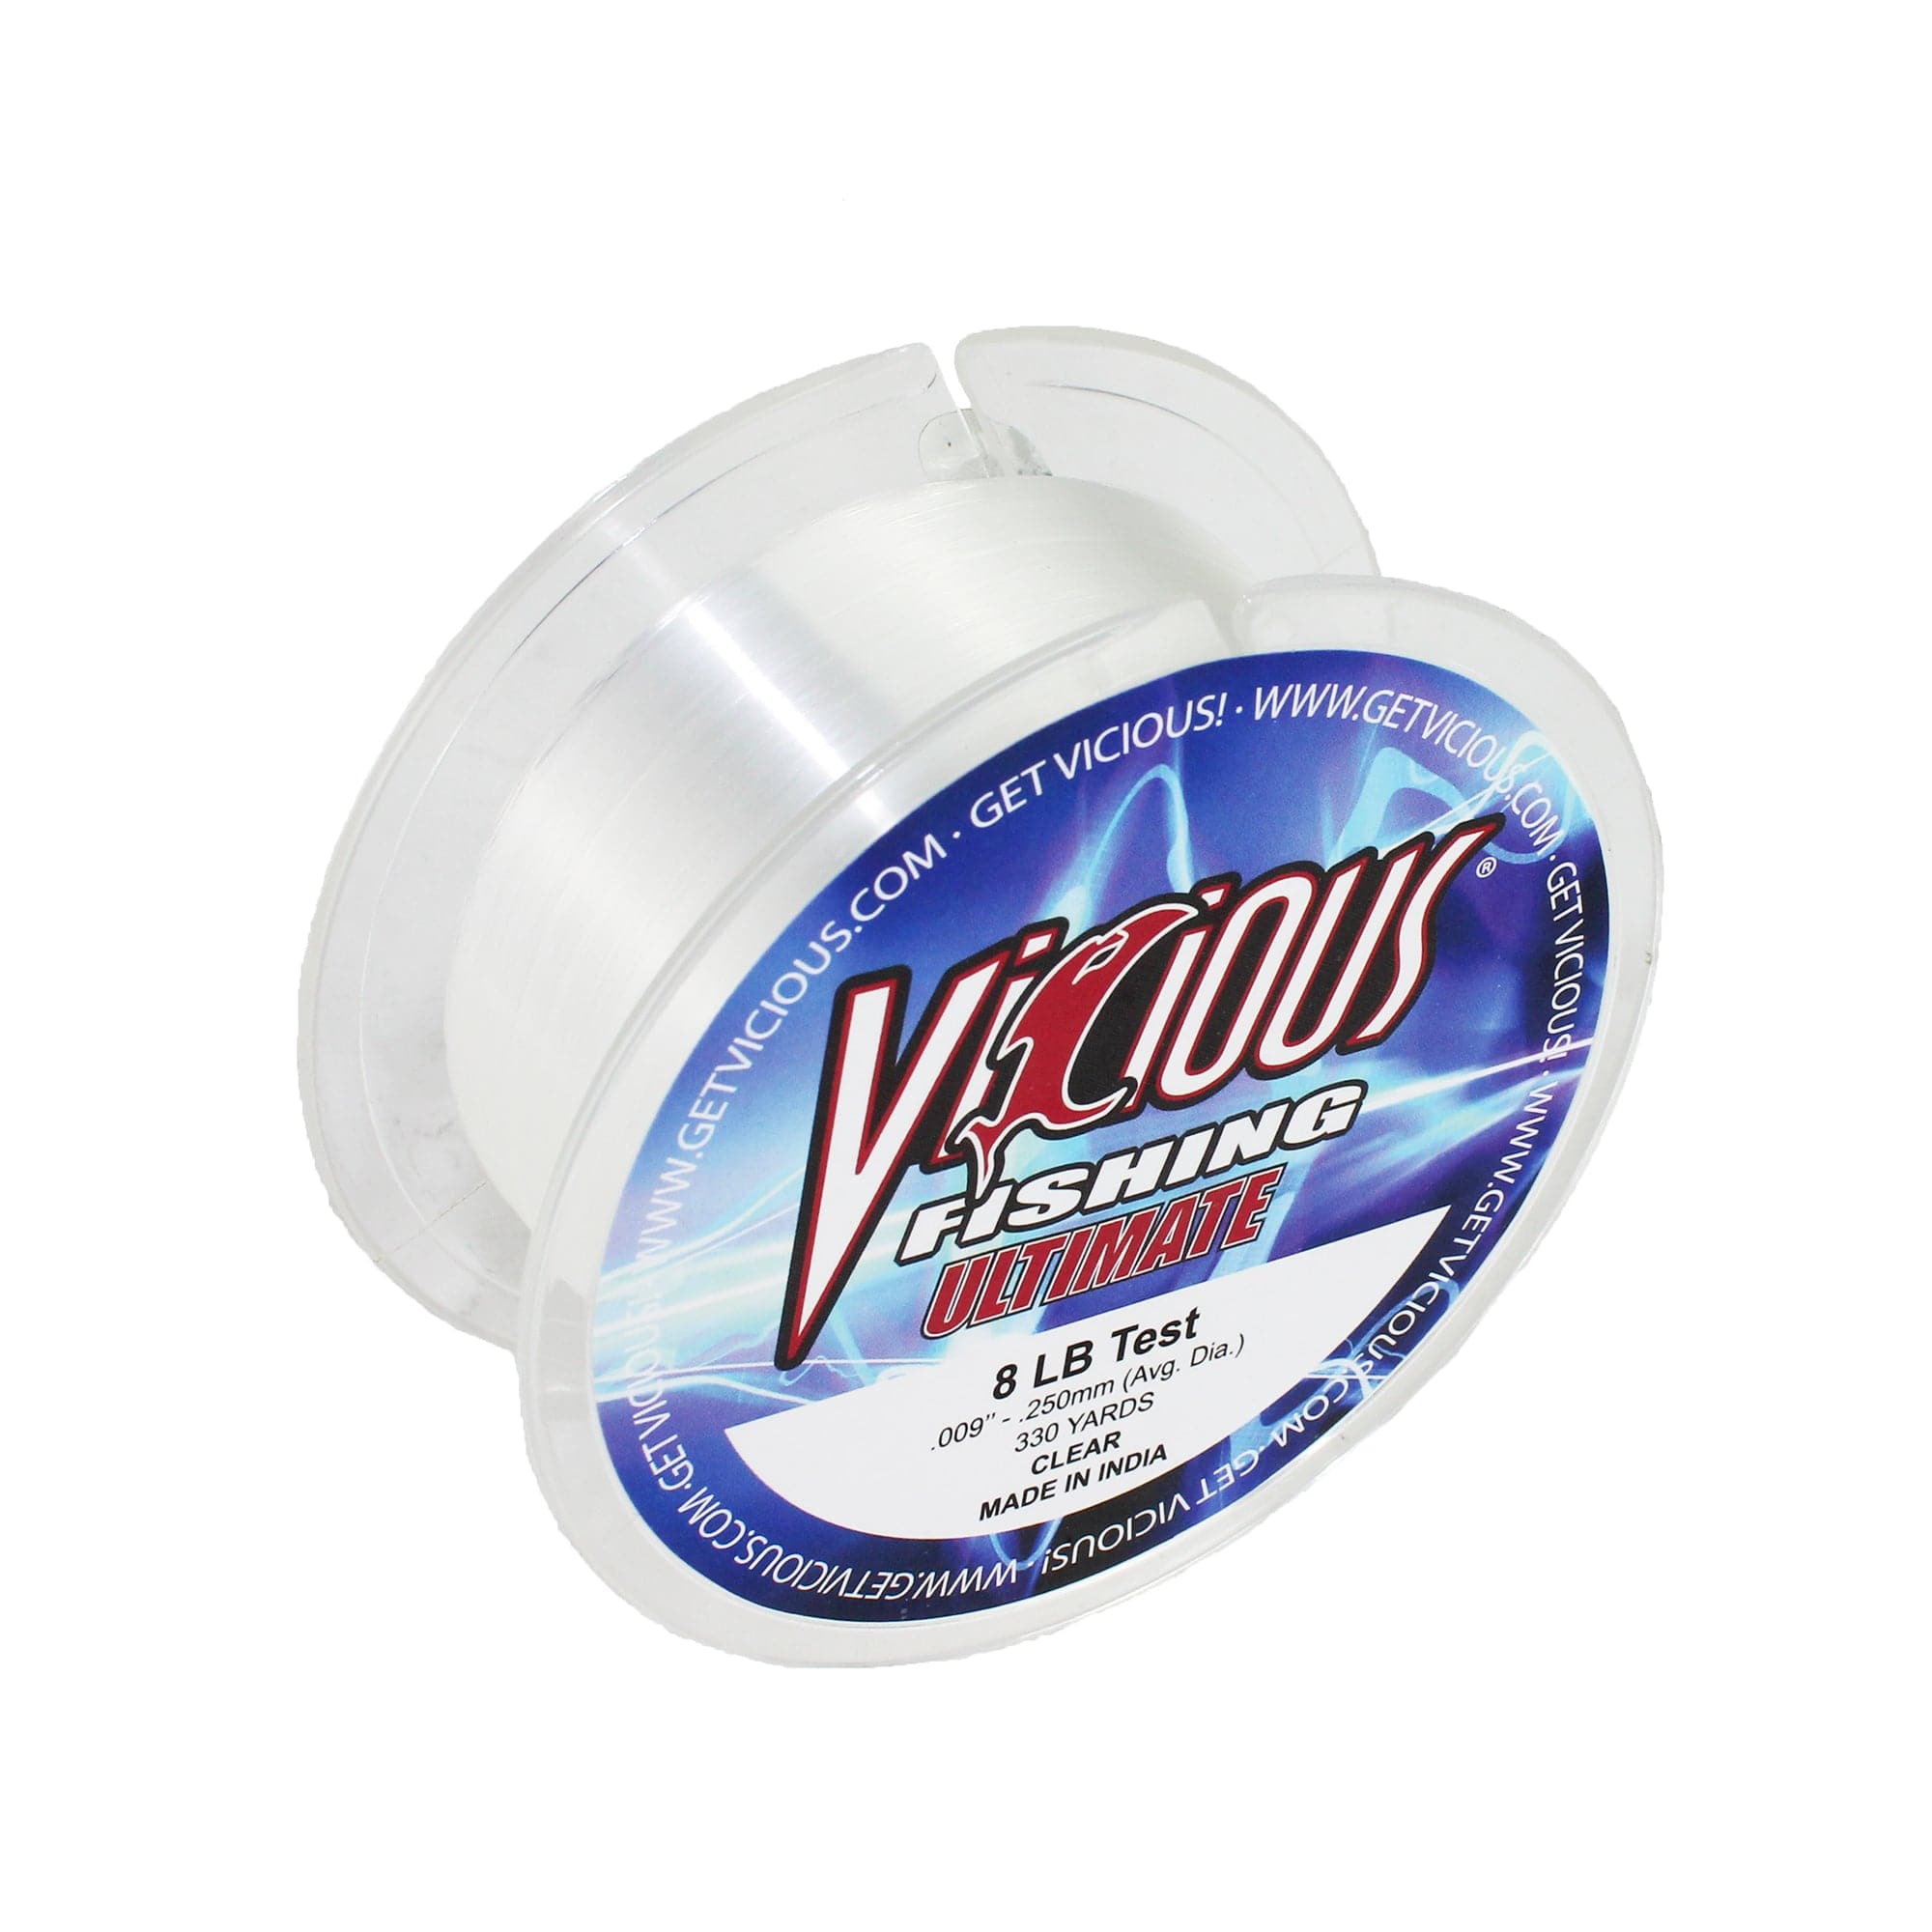 Vicious Fishing VCB Ultimate Monofilament Fishing Line, Clear Blue - 3